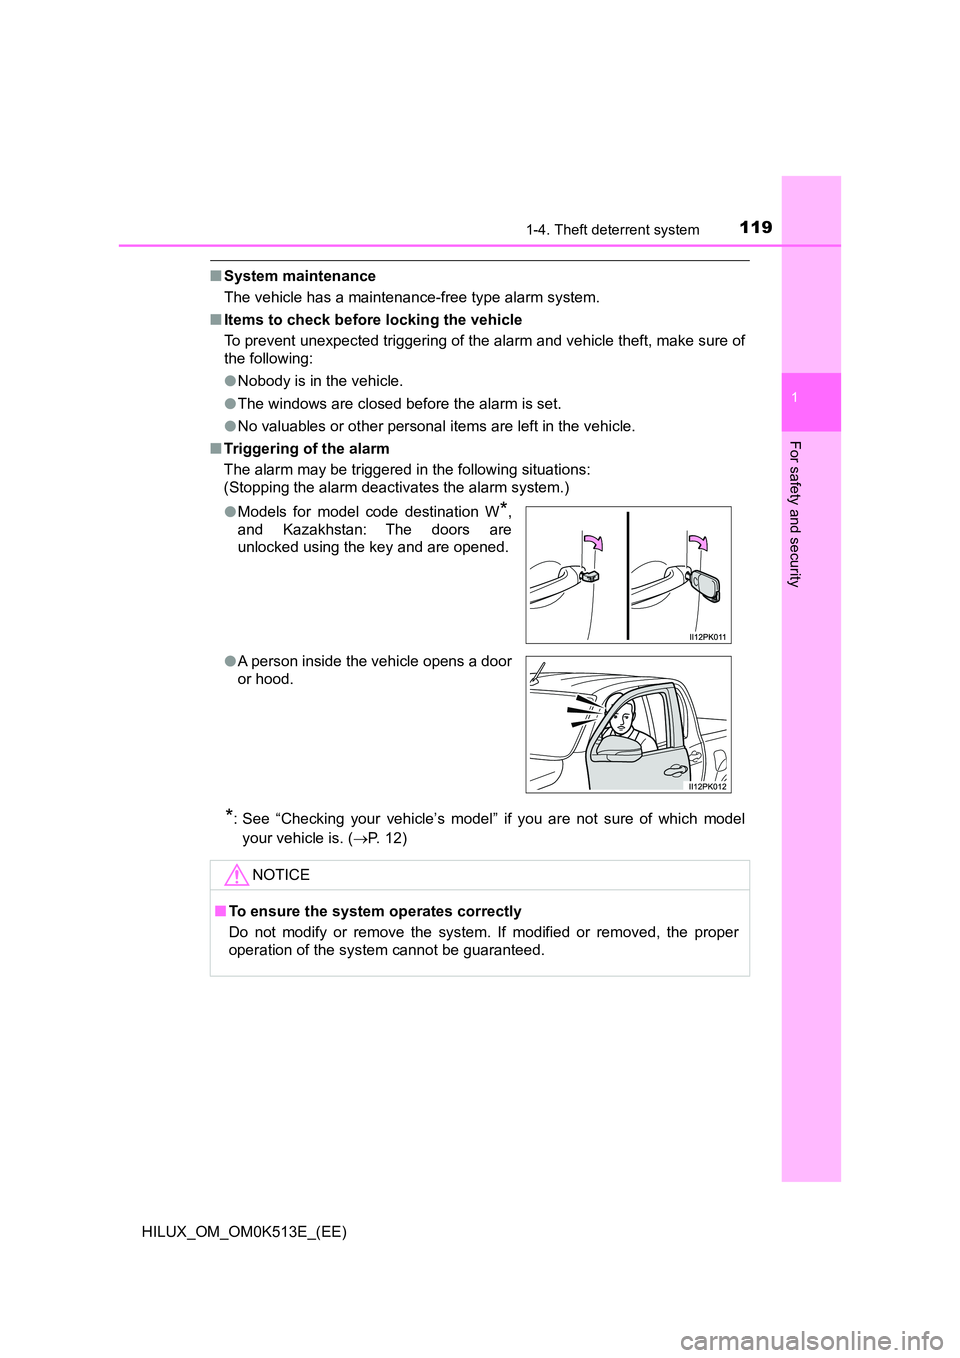 TOYOTA HILUX 2021  Owners Manual (in English) 1191-4. Theft deterrent system
1
HILUX_OM_OM0K513E_(EE)
For safety and security
�QSystem maintenance 
The vehicle has a maintenance-free type alarm system. 
�Q Items to check before locking the vehicl